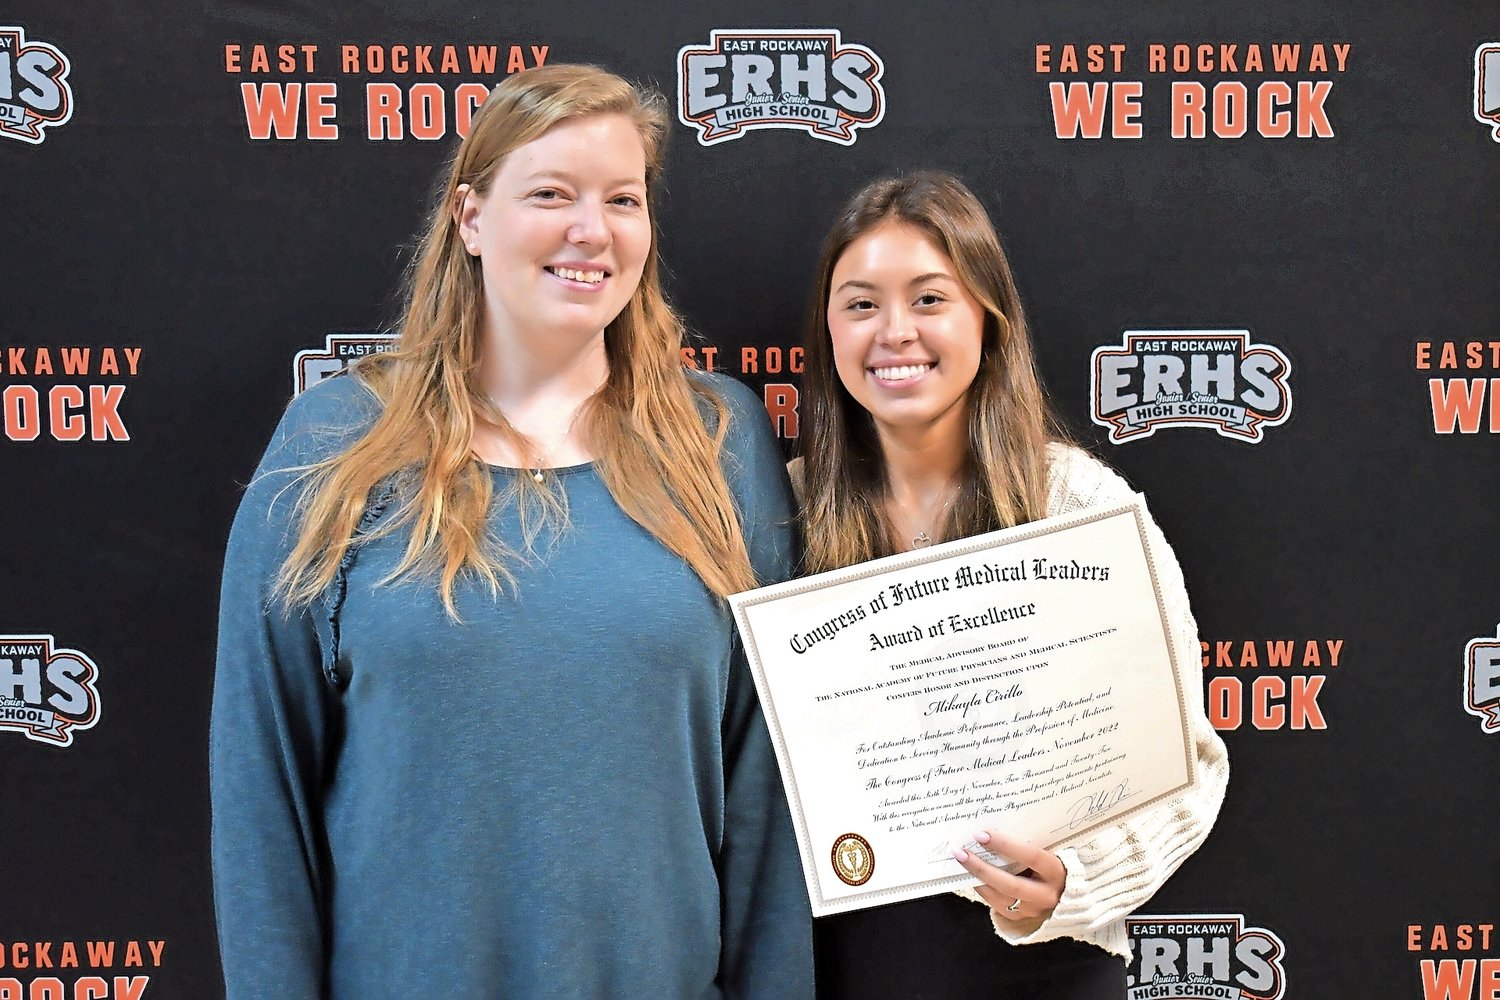 East Rockaway High School senior and Congress of Future Medical Leaders Award of Excellence recipient Mikayla Cirillo with School Counselor, Ms. Rebecca Mantle.